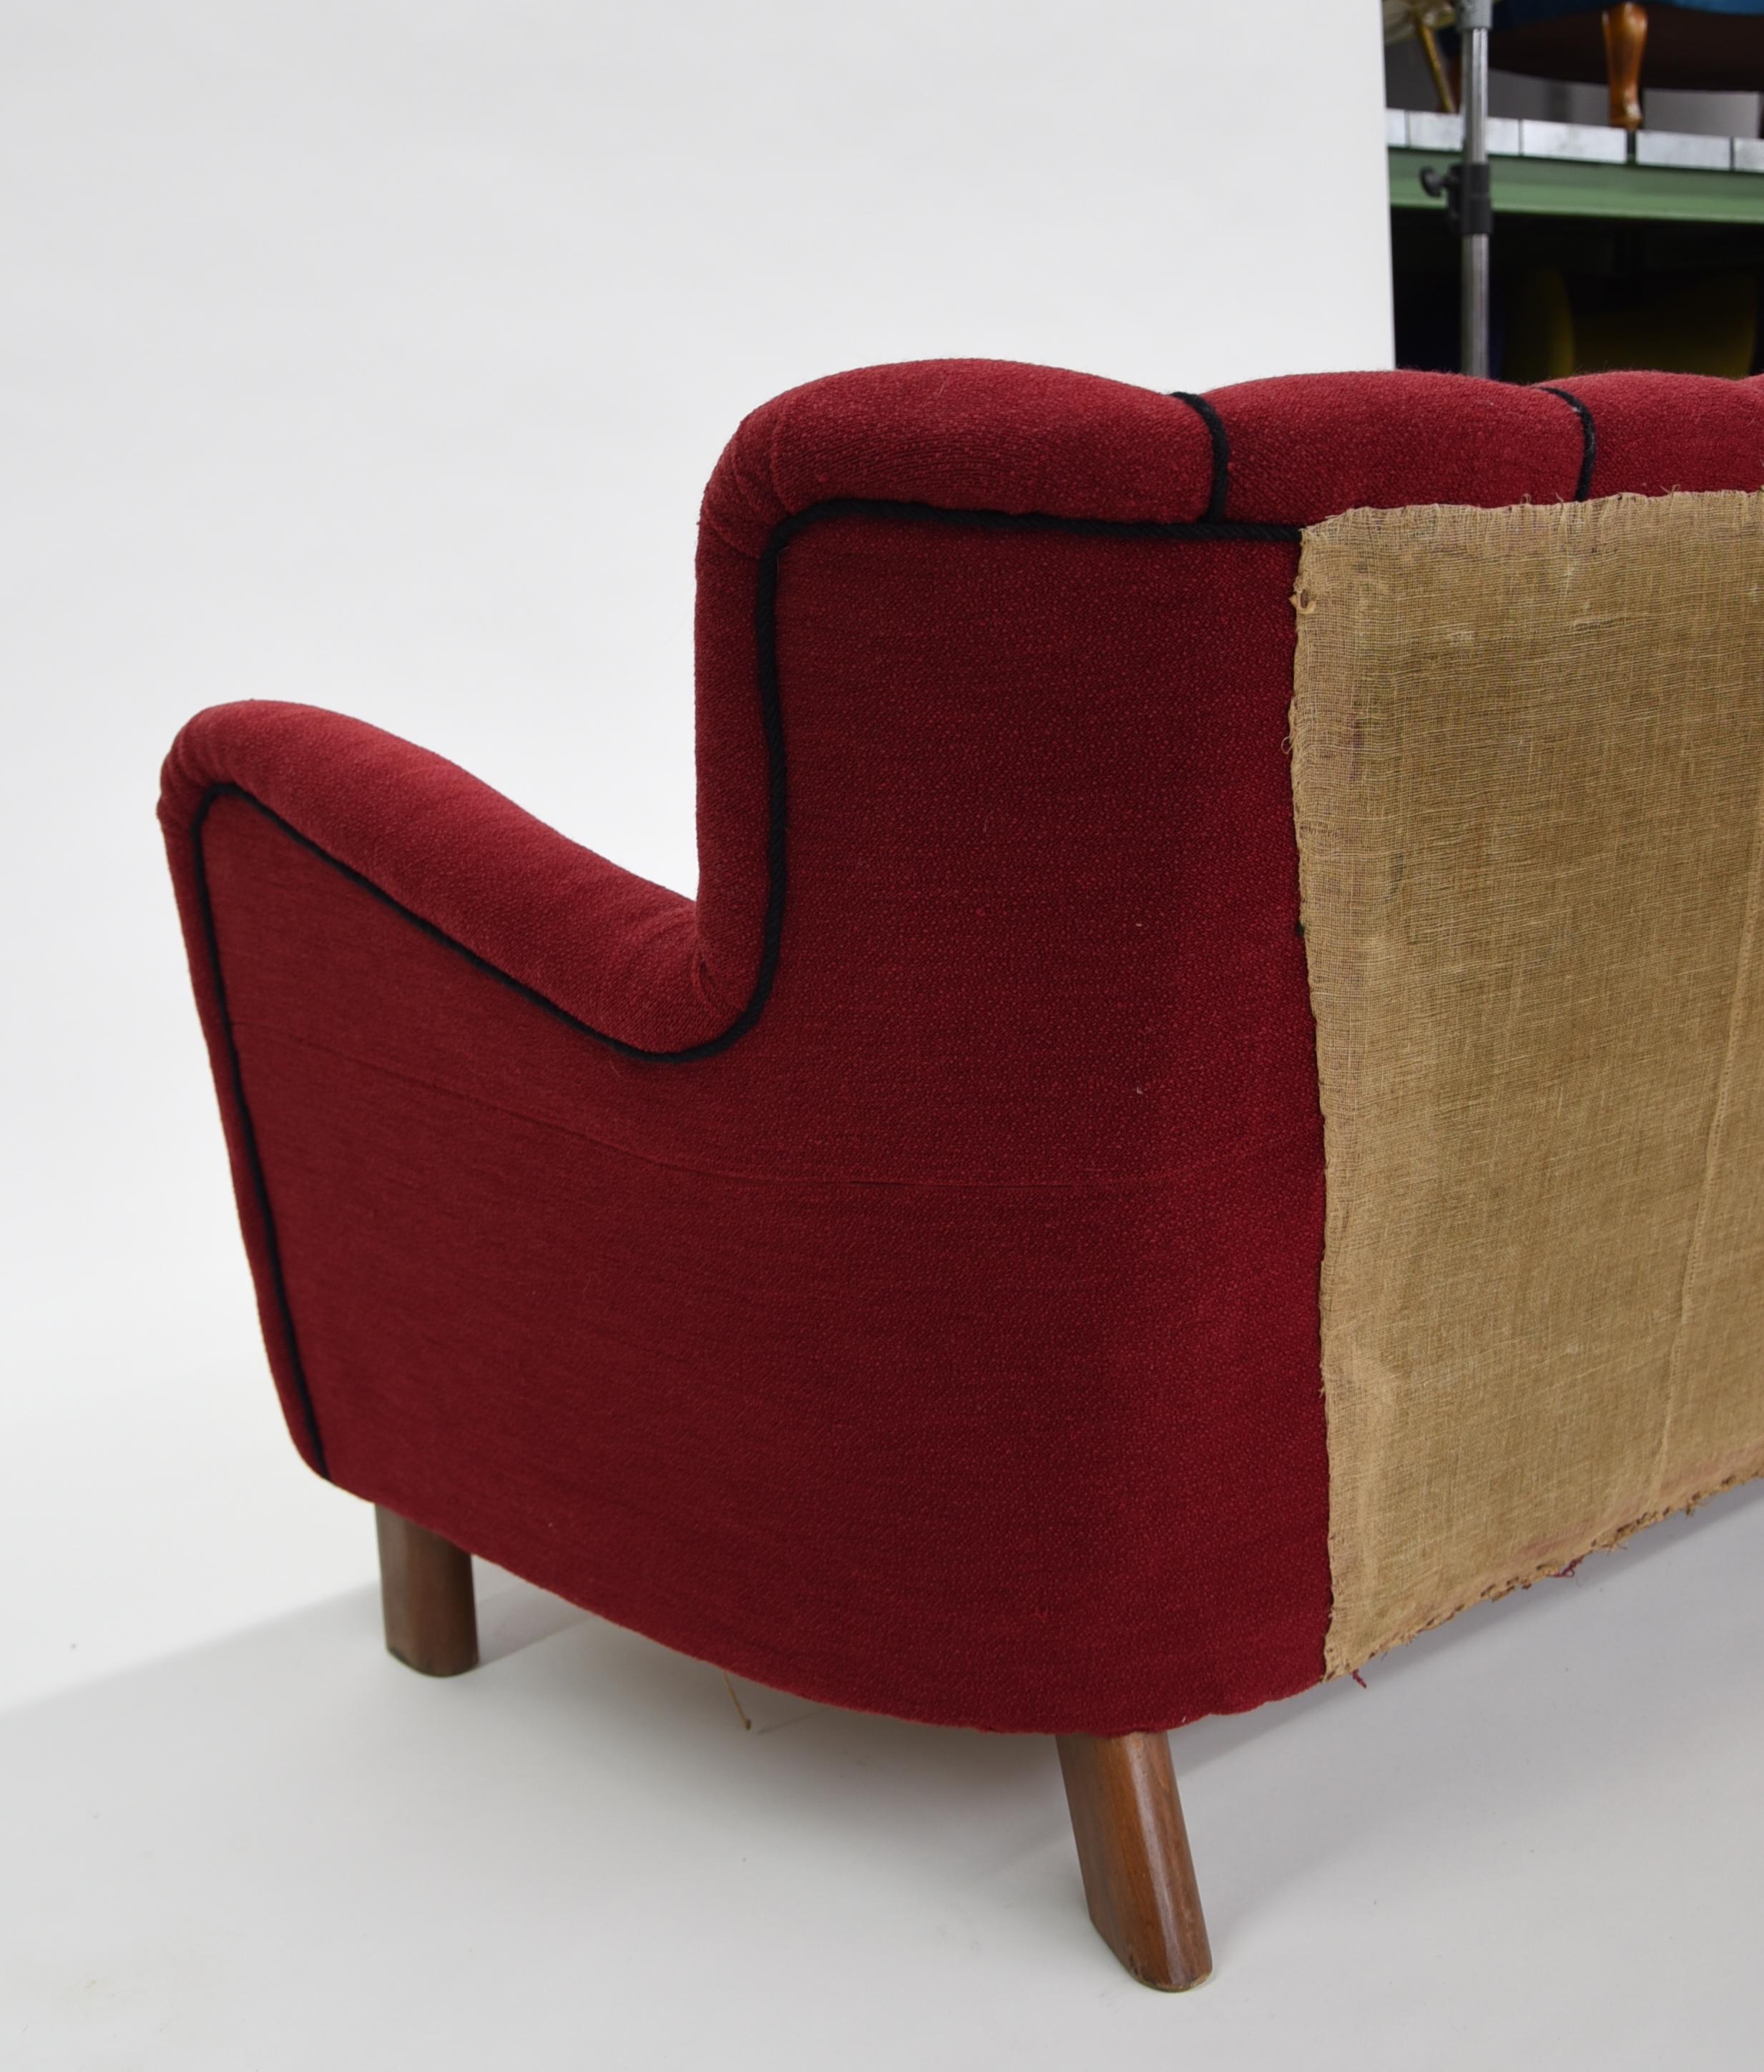 Fritz Hansen Three-Seat Sofa Model 1669a Red 3-Seat Couch 1940s Midcentury 2